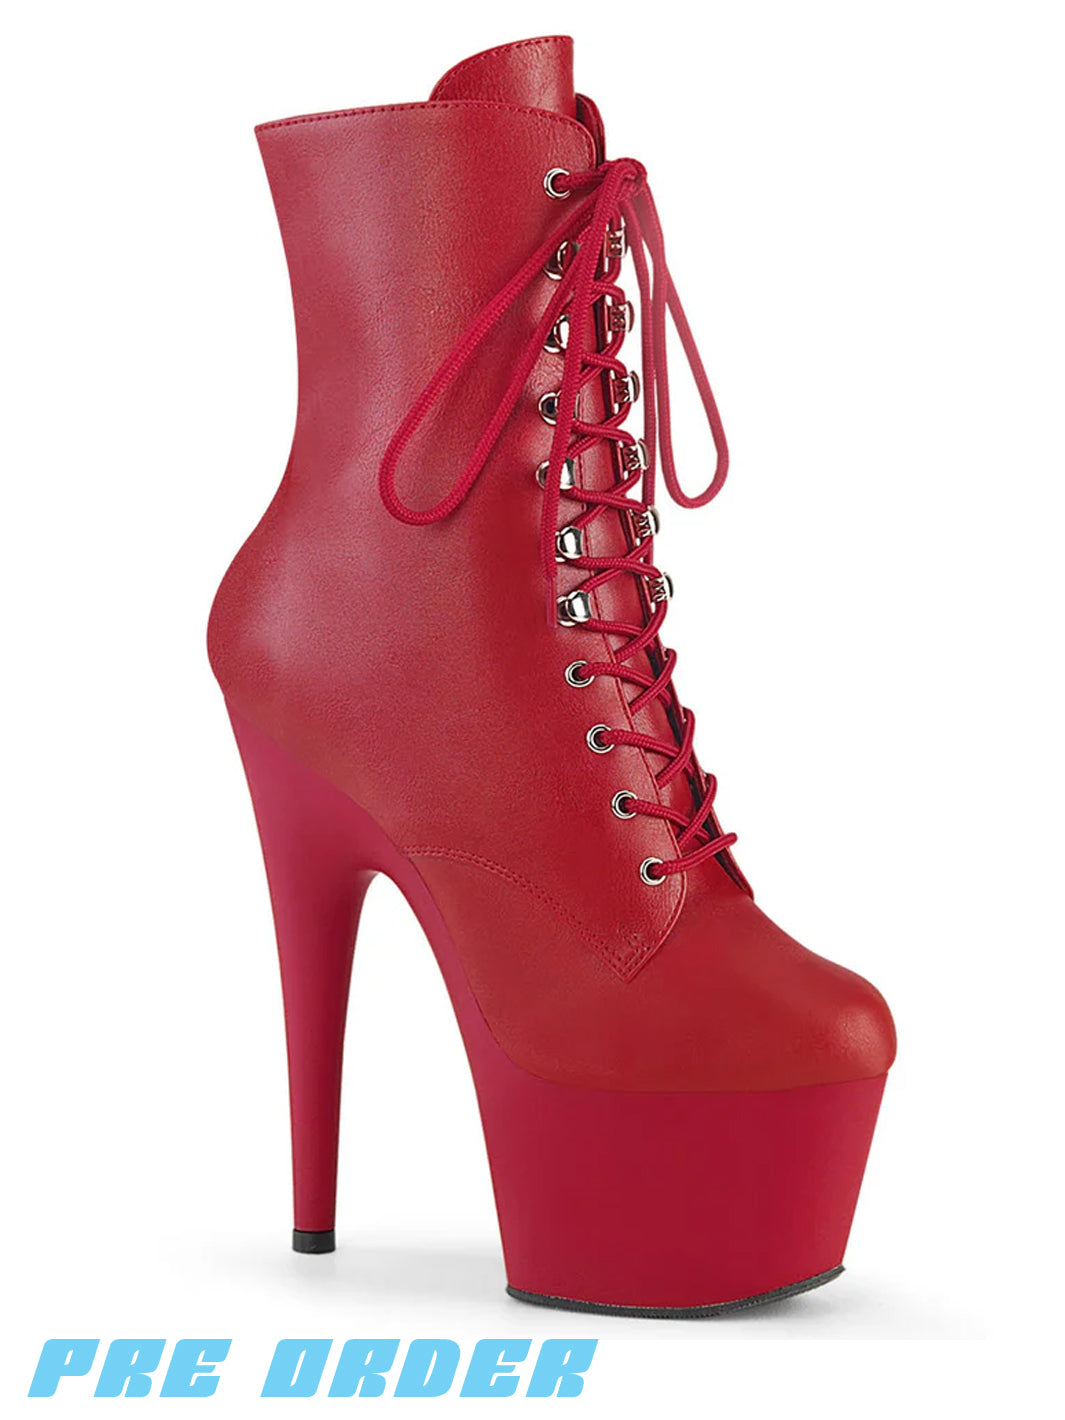 ADORE-1020 - RED FAUX LEATHER ✰ PRE ORDER ✰